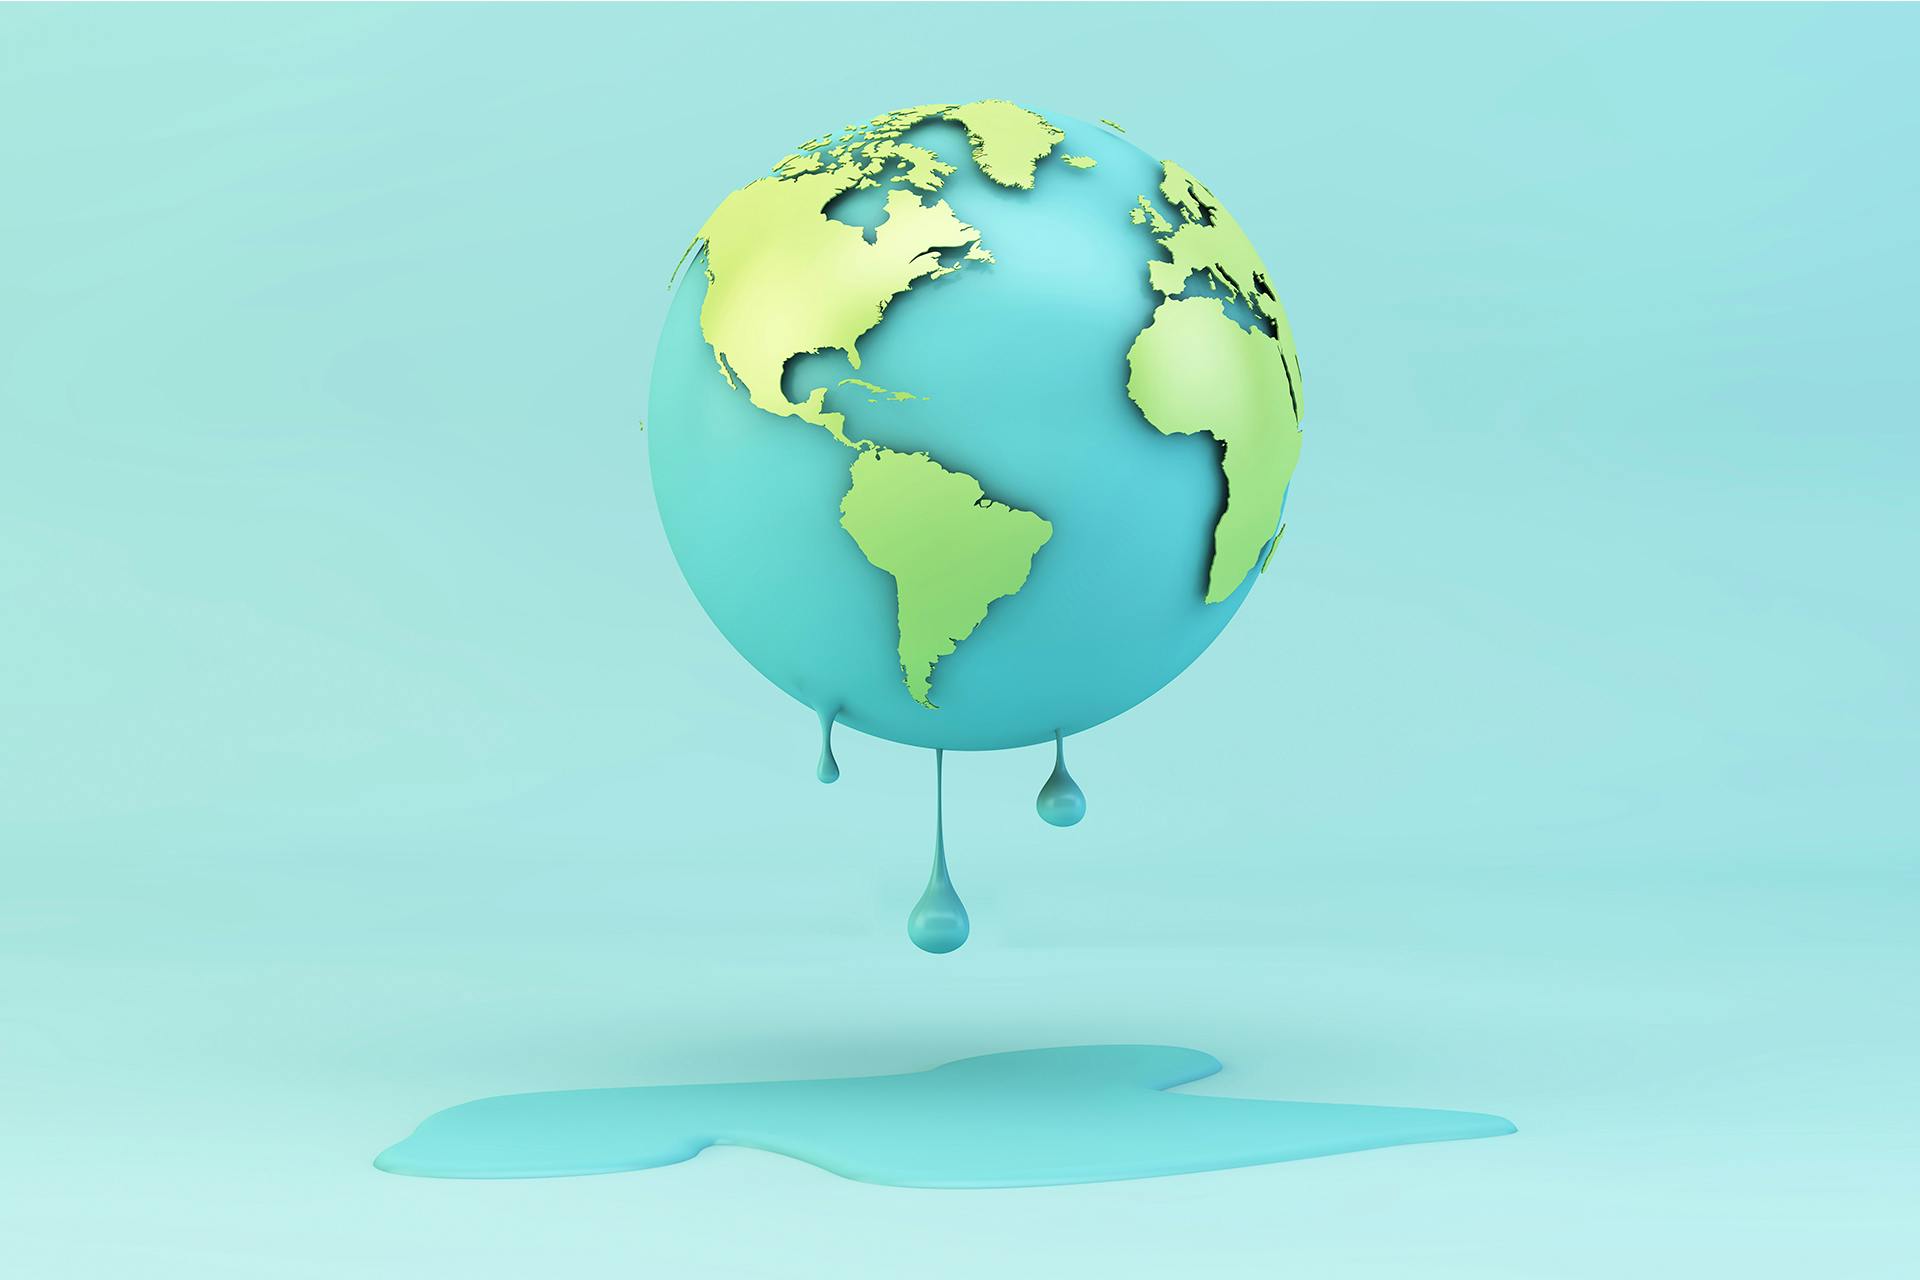 A cartoon model of the Earth that is melting. Below the floating Earth is a puddle. In this blog post, we examine how the topic of climate change is being discussed on social media.